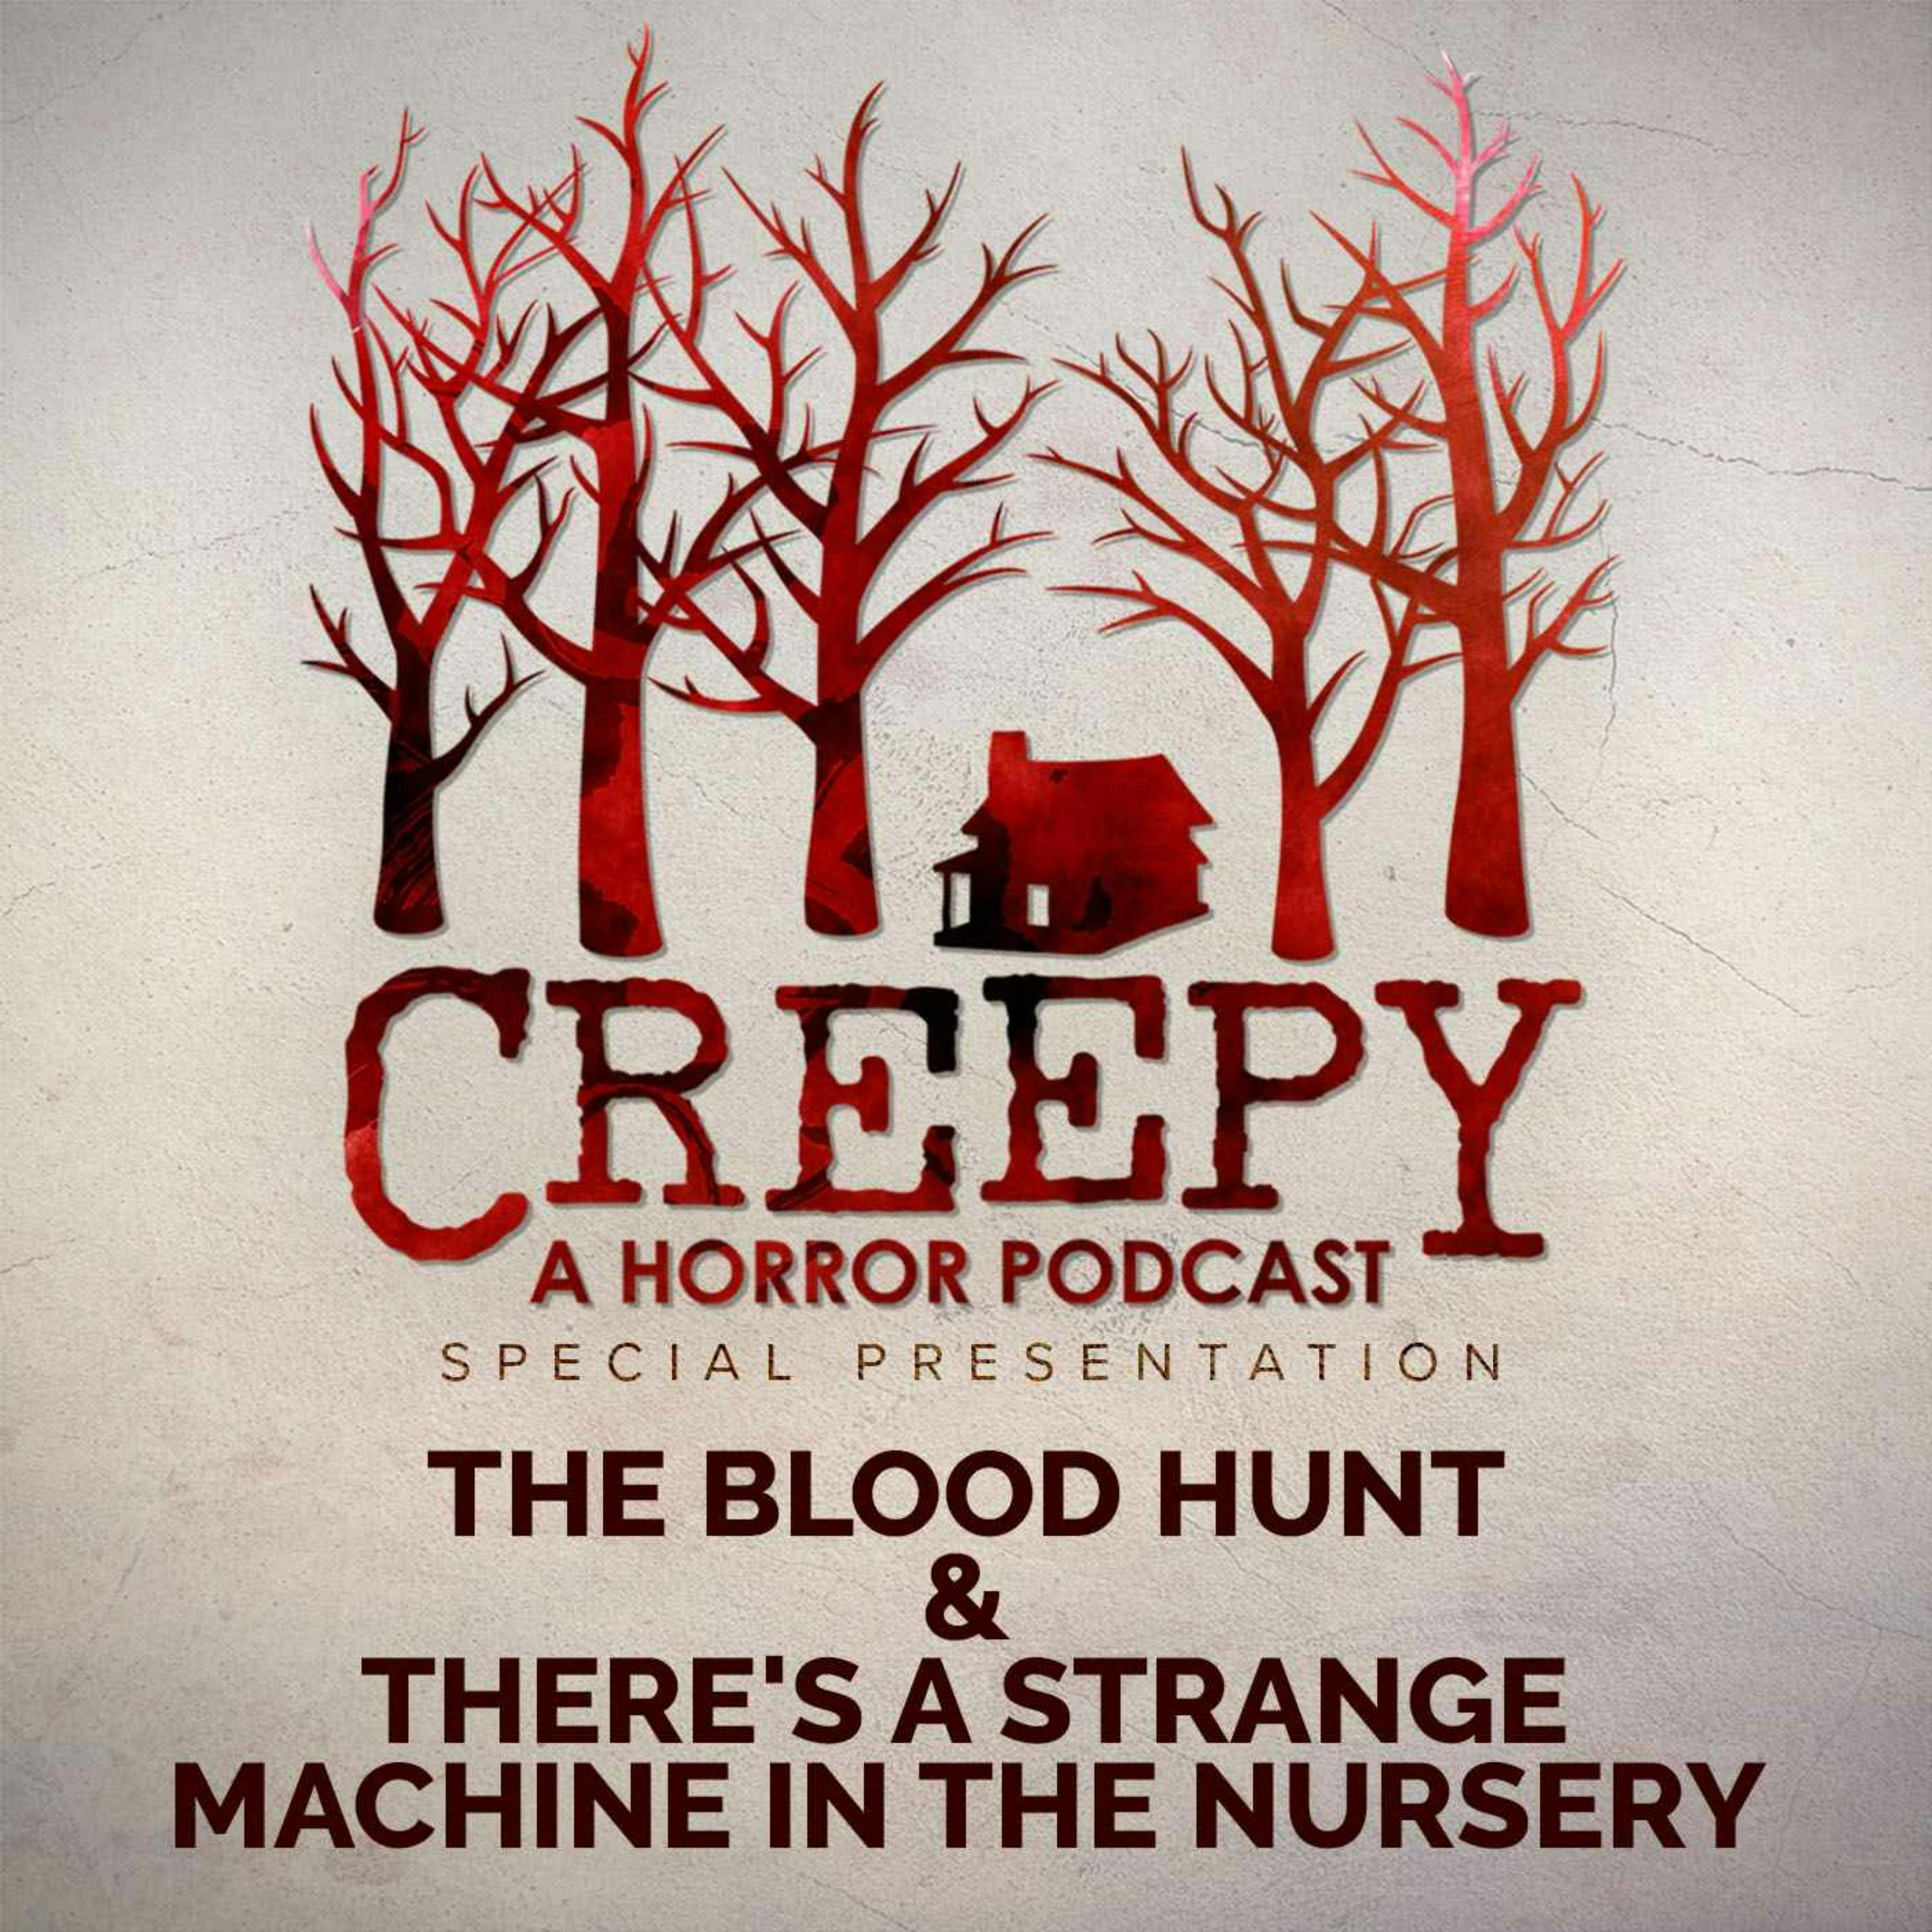 The Blood Hunt & There’s A Strange Machine In The Nursery